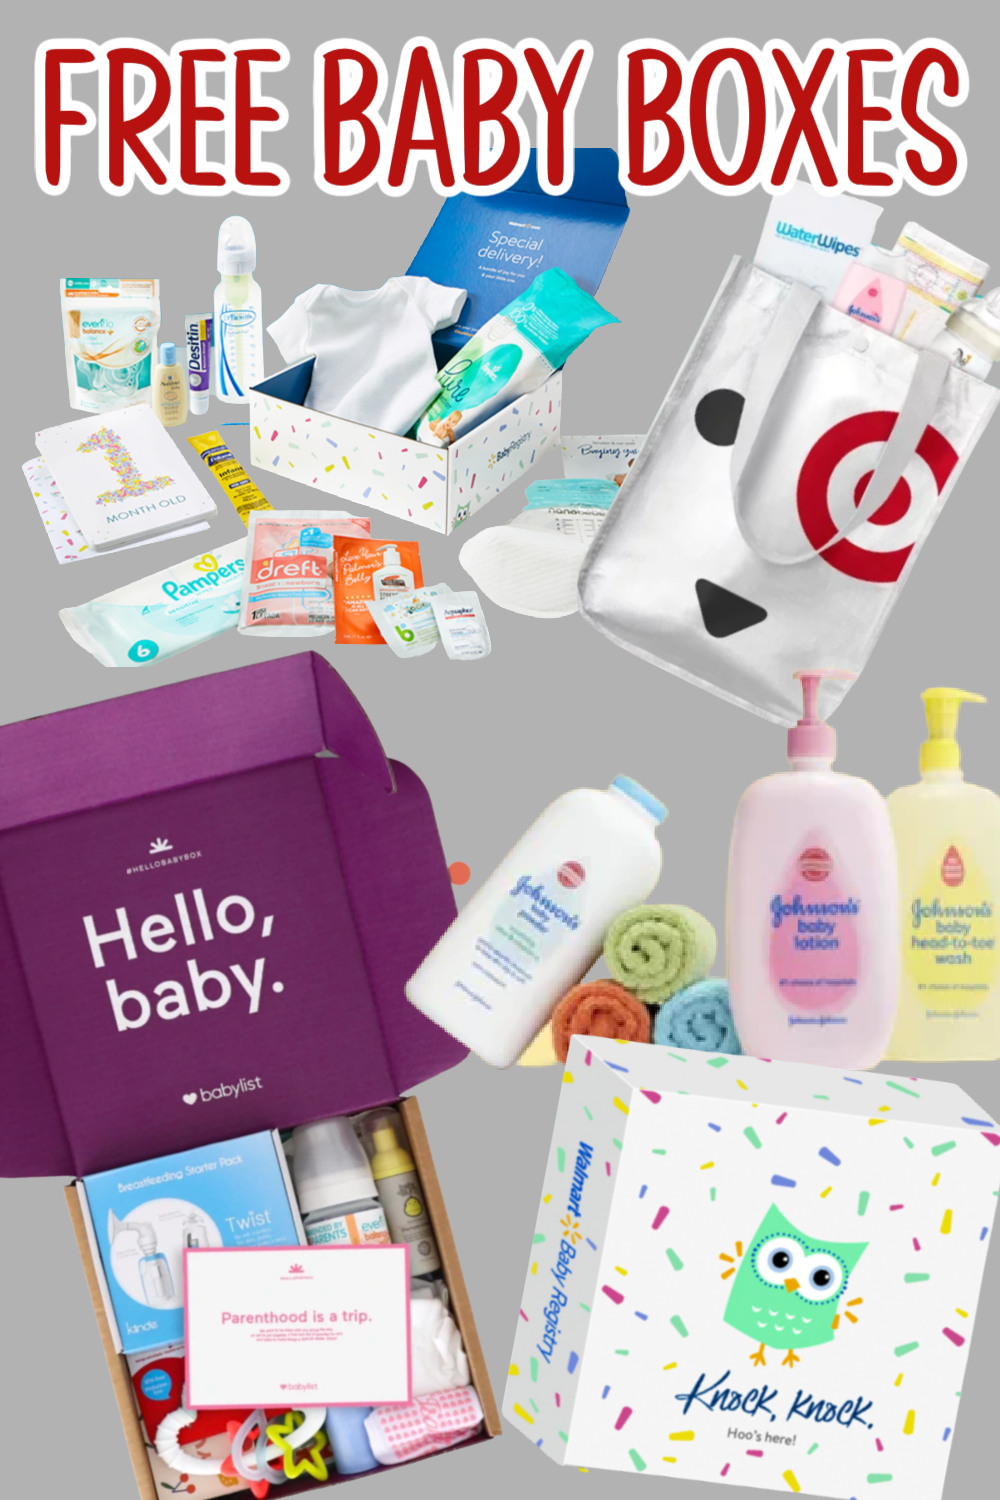 Free baby samples from companies that send free baby stuff. Free diaper samples, baby coupons by mail all in their own boxes.